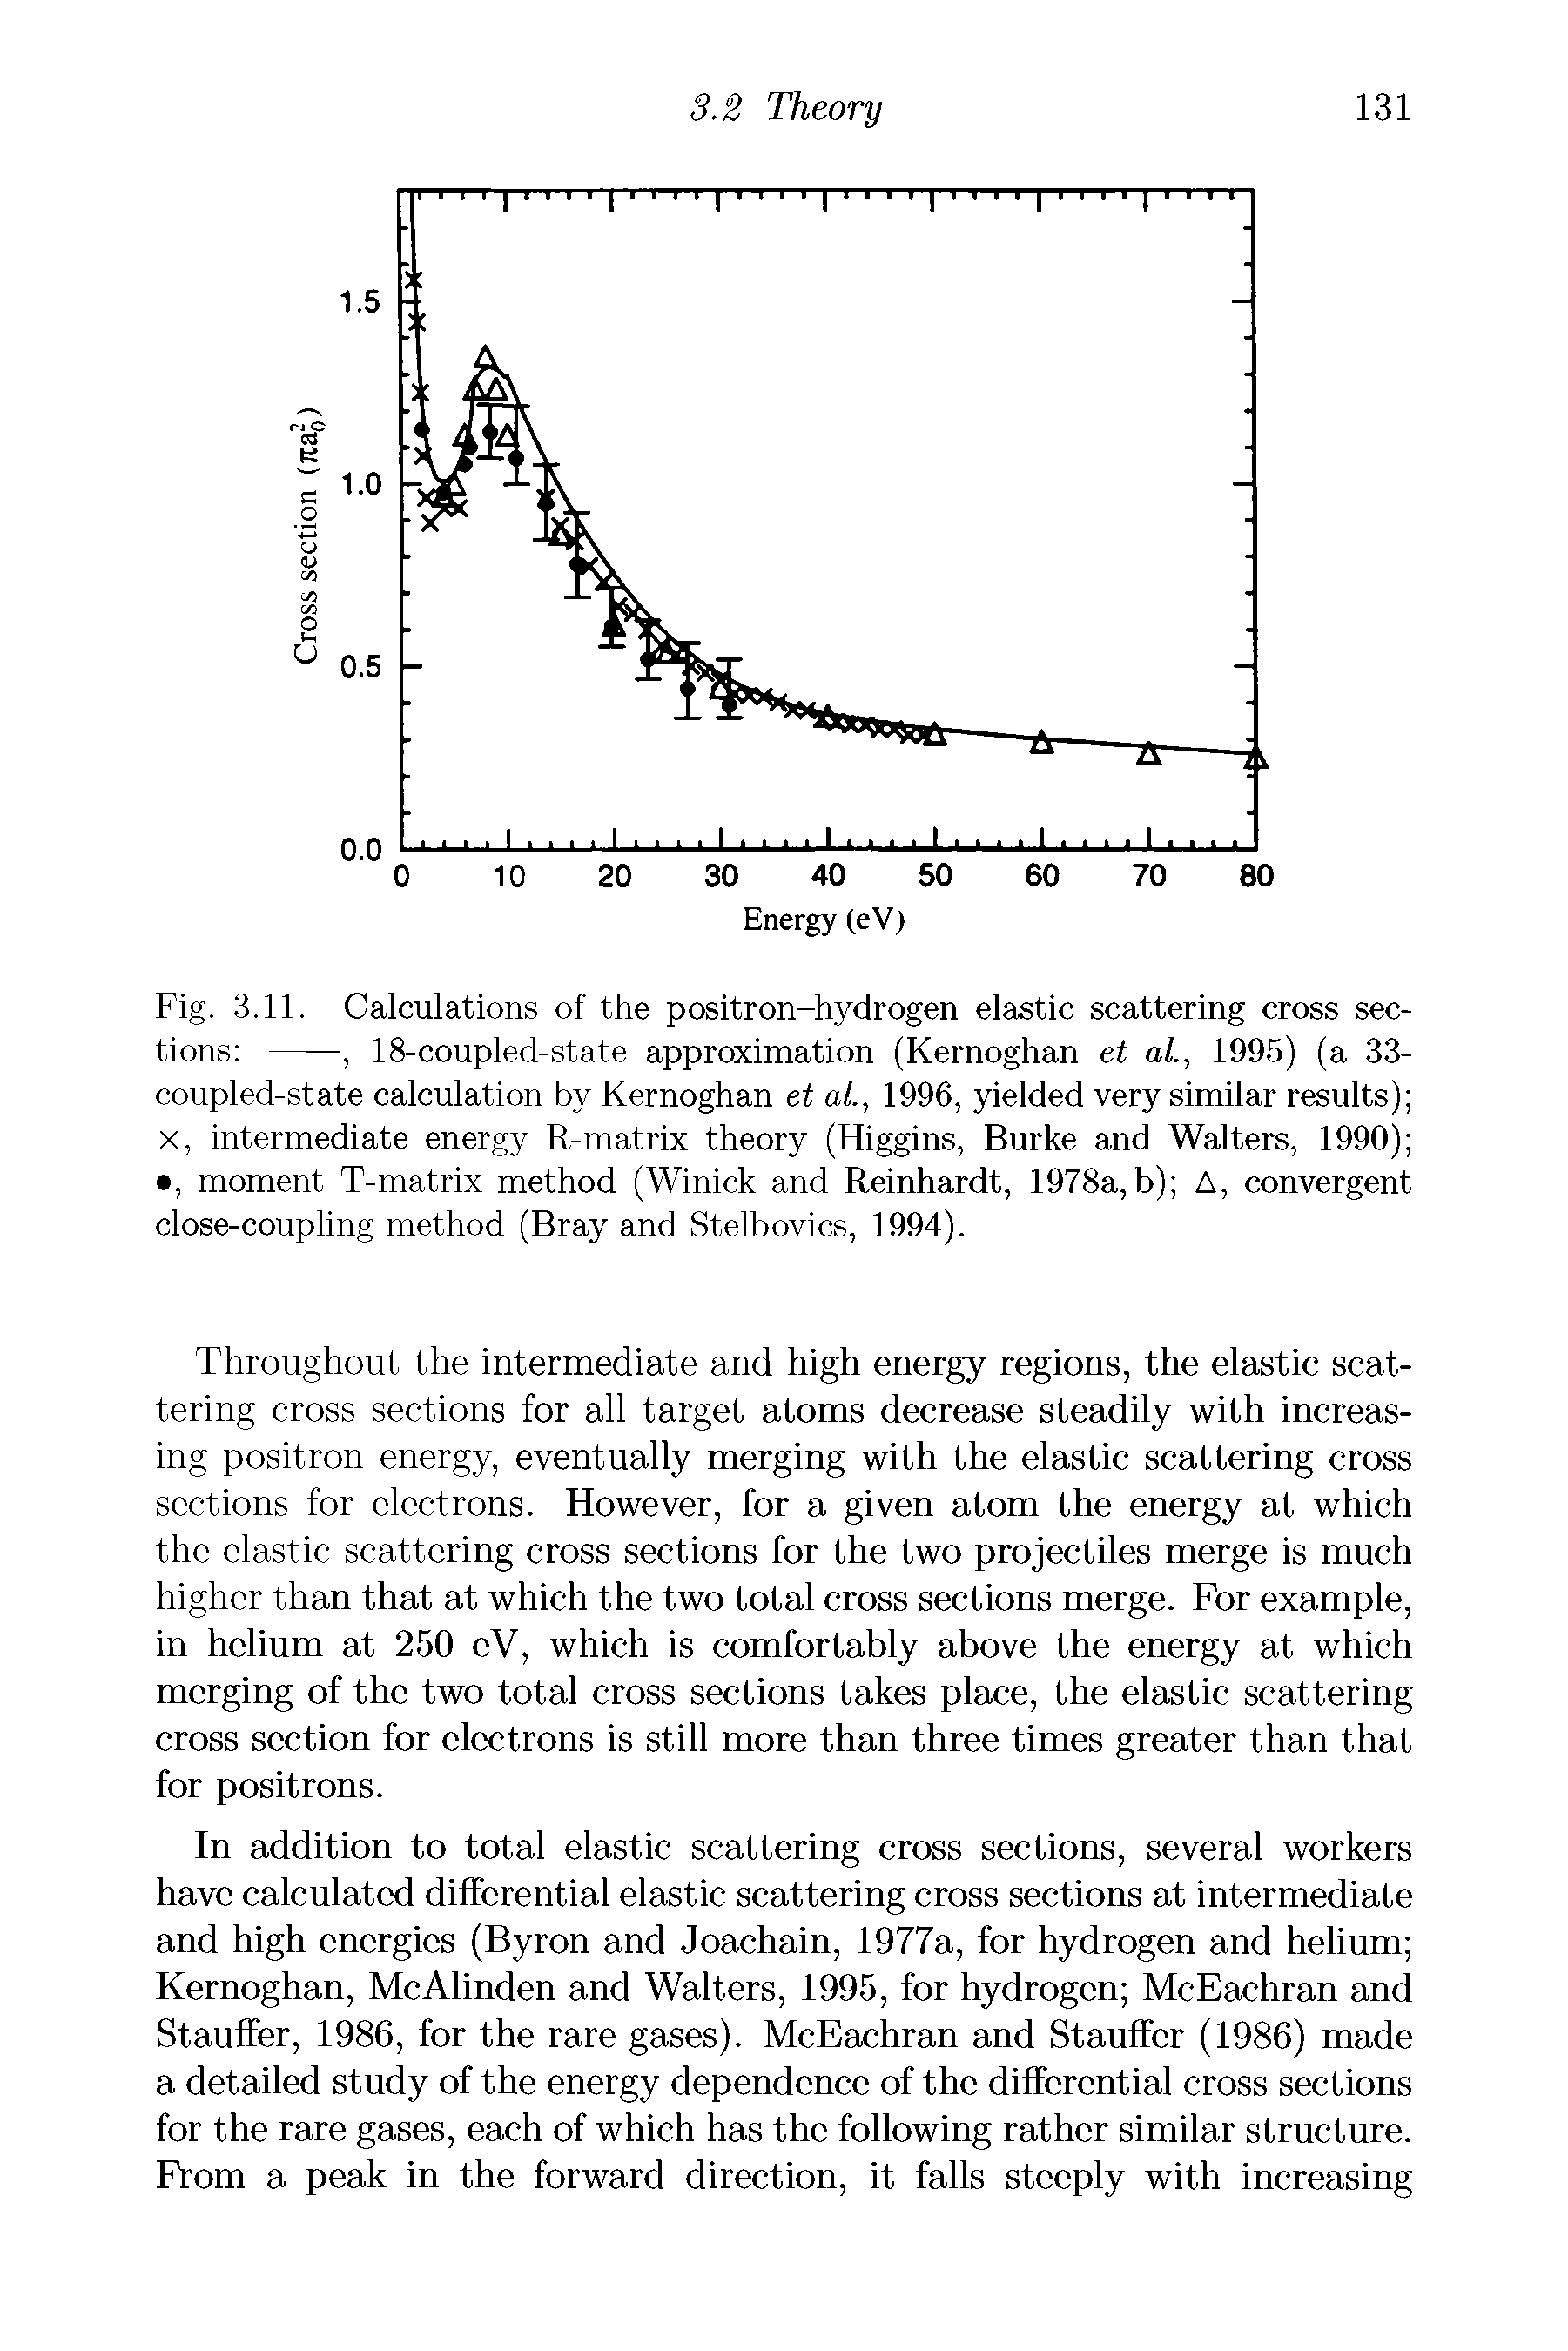 Fig. 3.11. Calculations of the positron-hydrogen elastic scattering cross sections ----, 18-coupled-state approximation (Kernoghan et al., 1995) (a 33-...